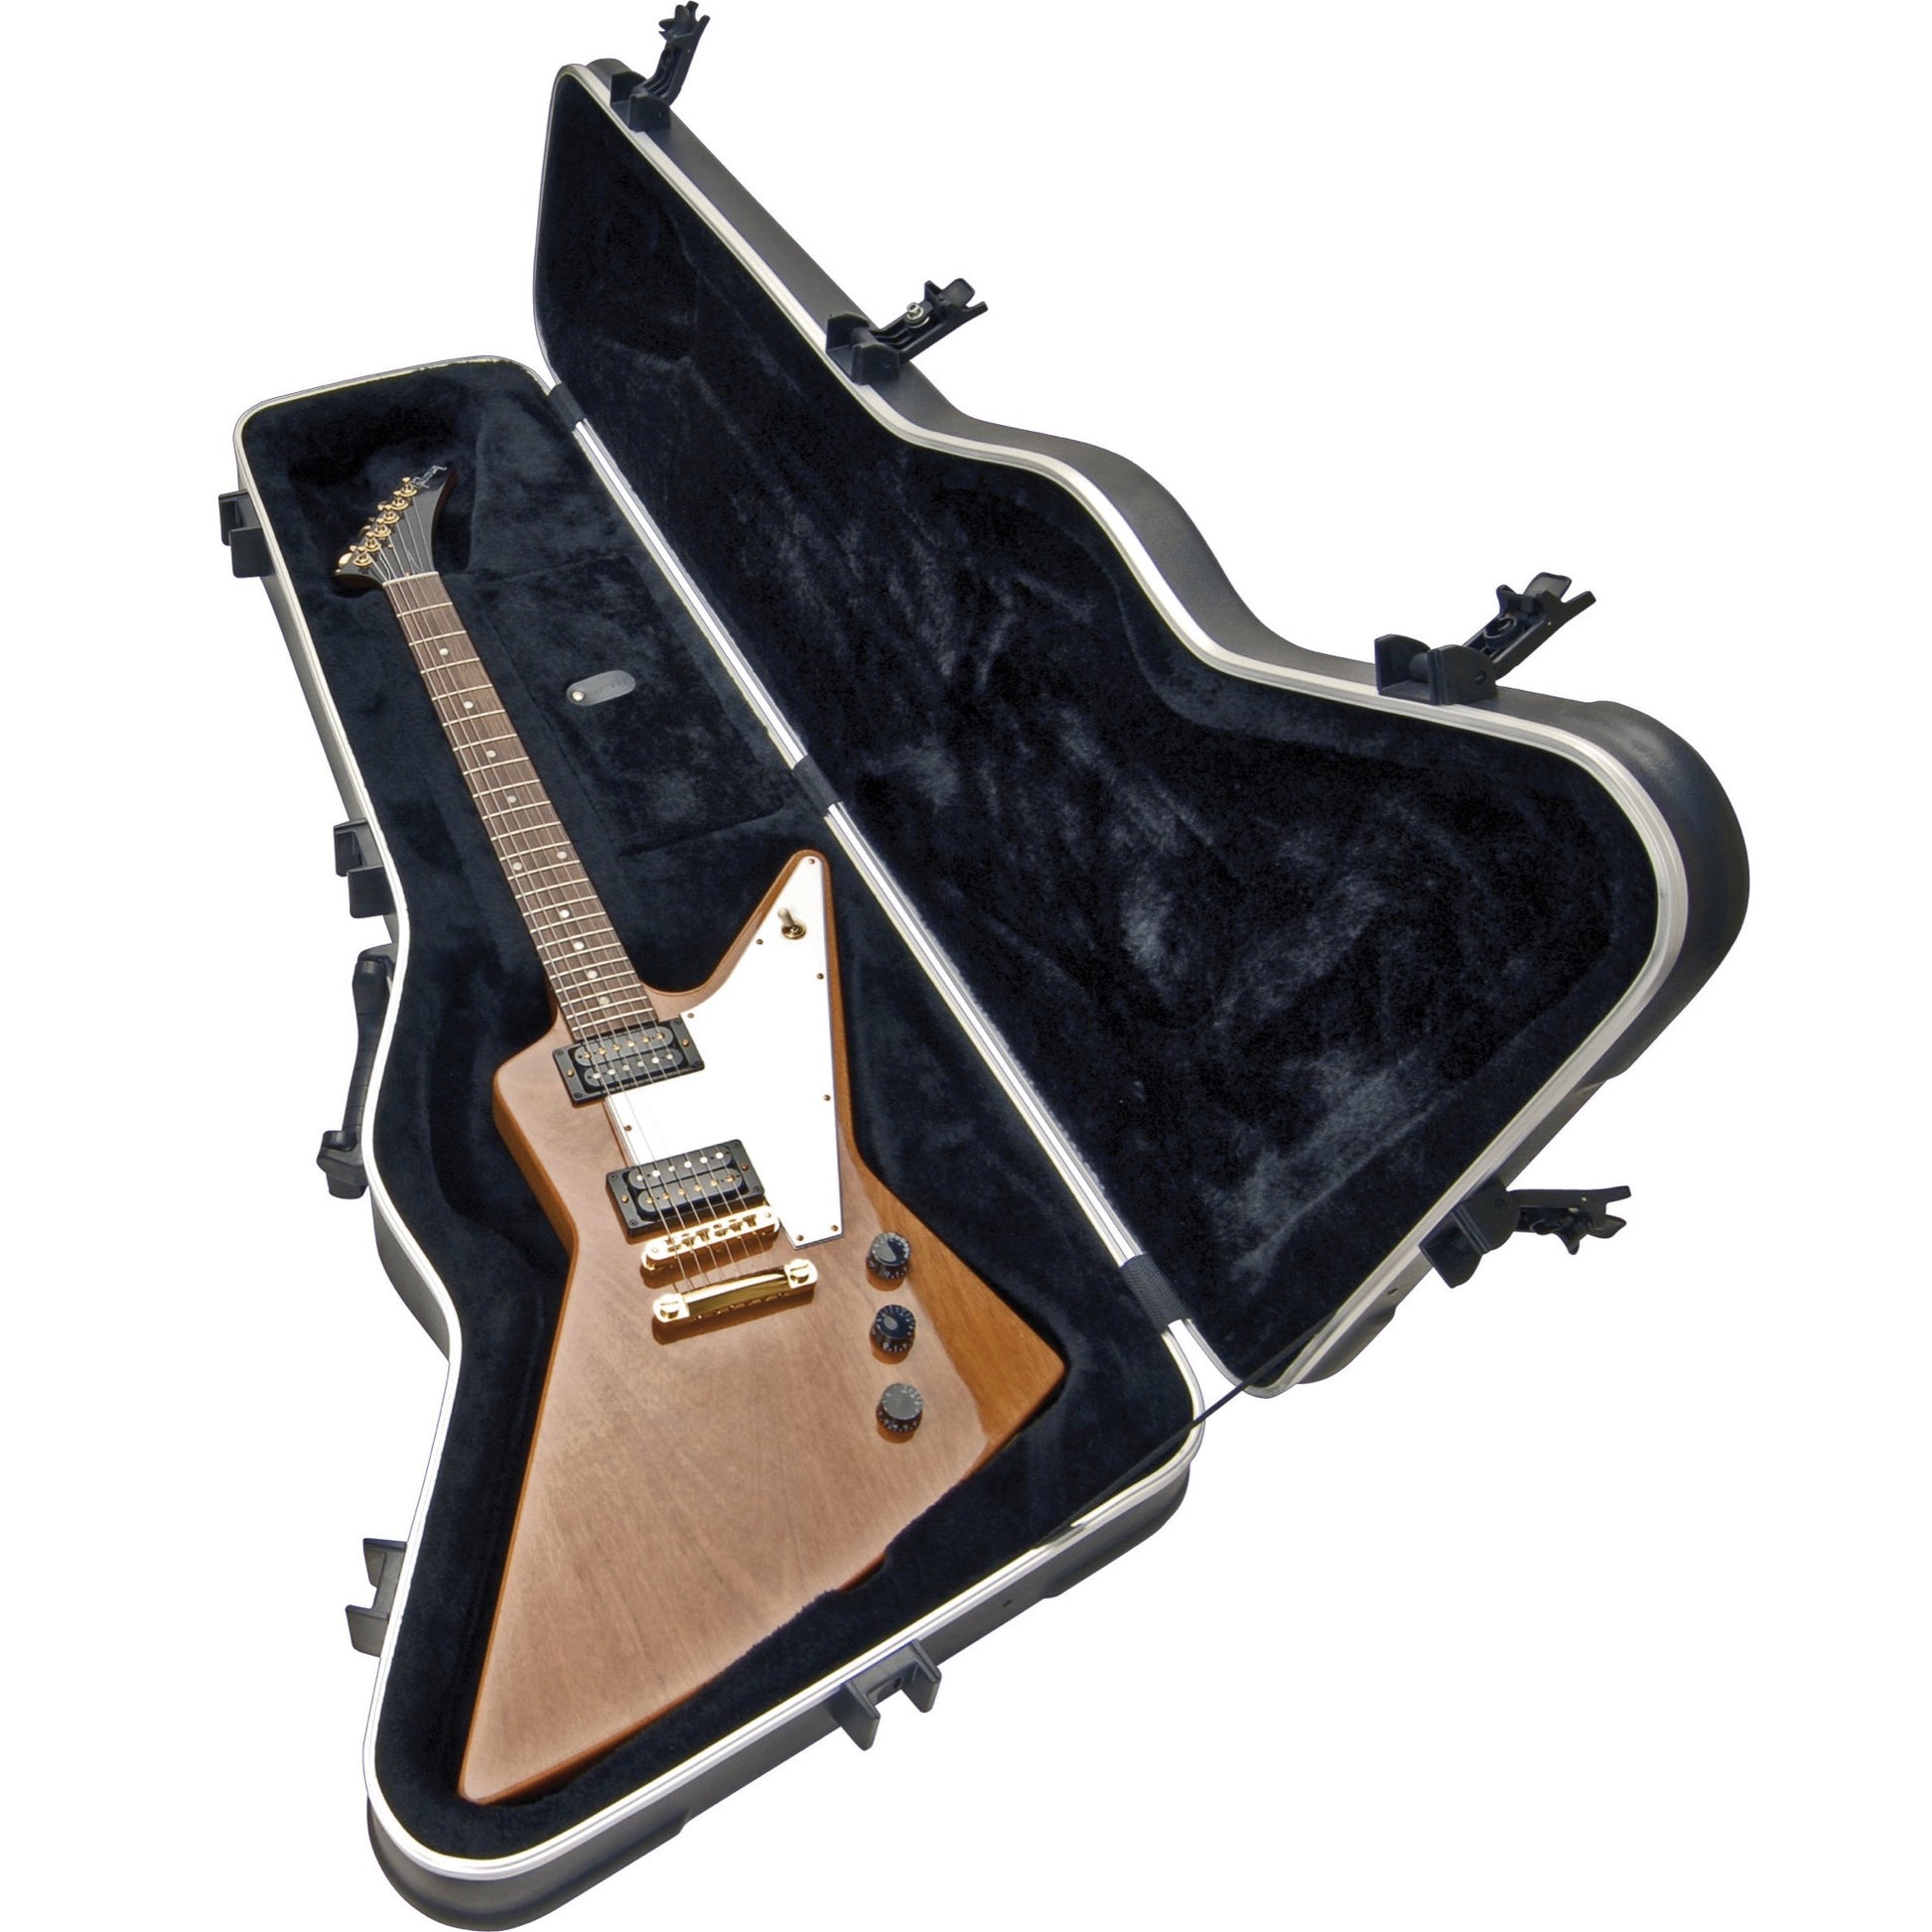 SKB 63 Molded Case for Gibson or Epiphone Explorer and Firebird Guitars